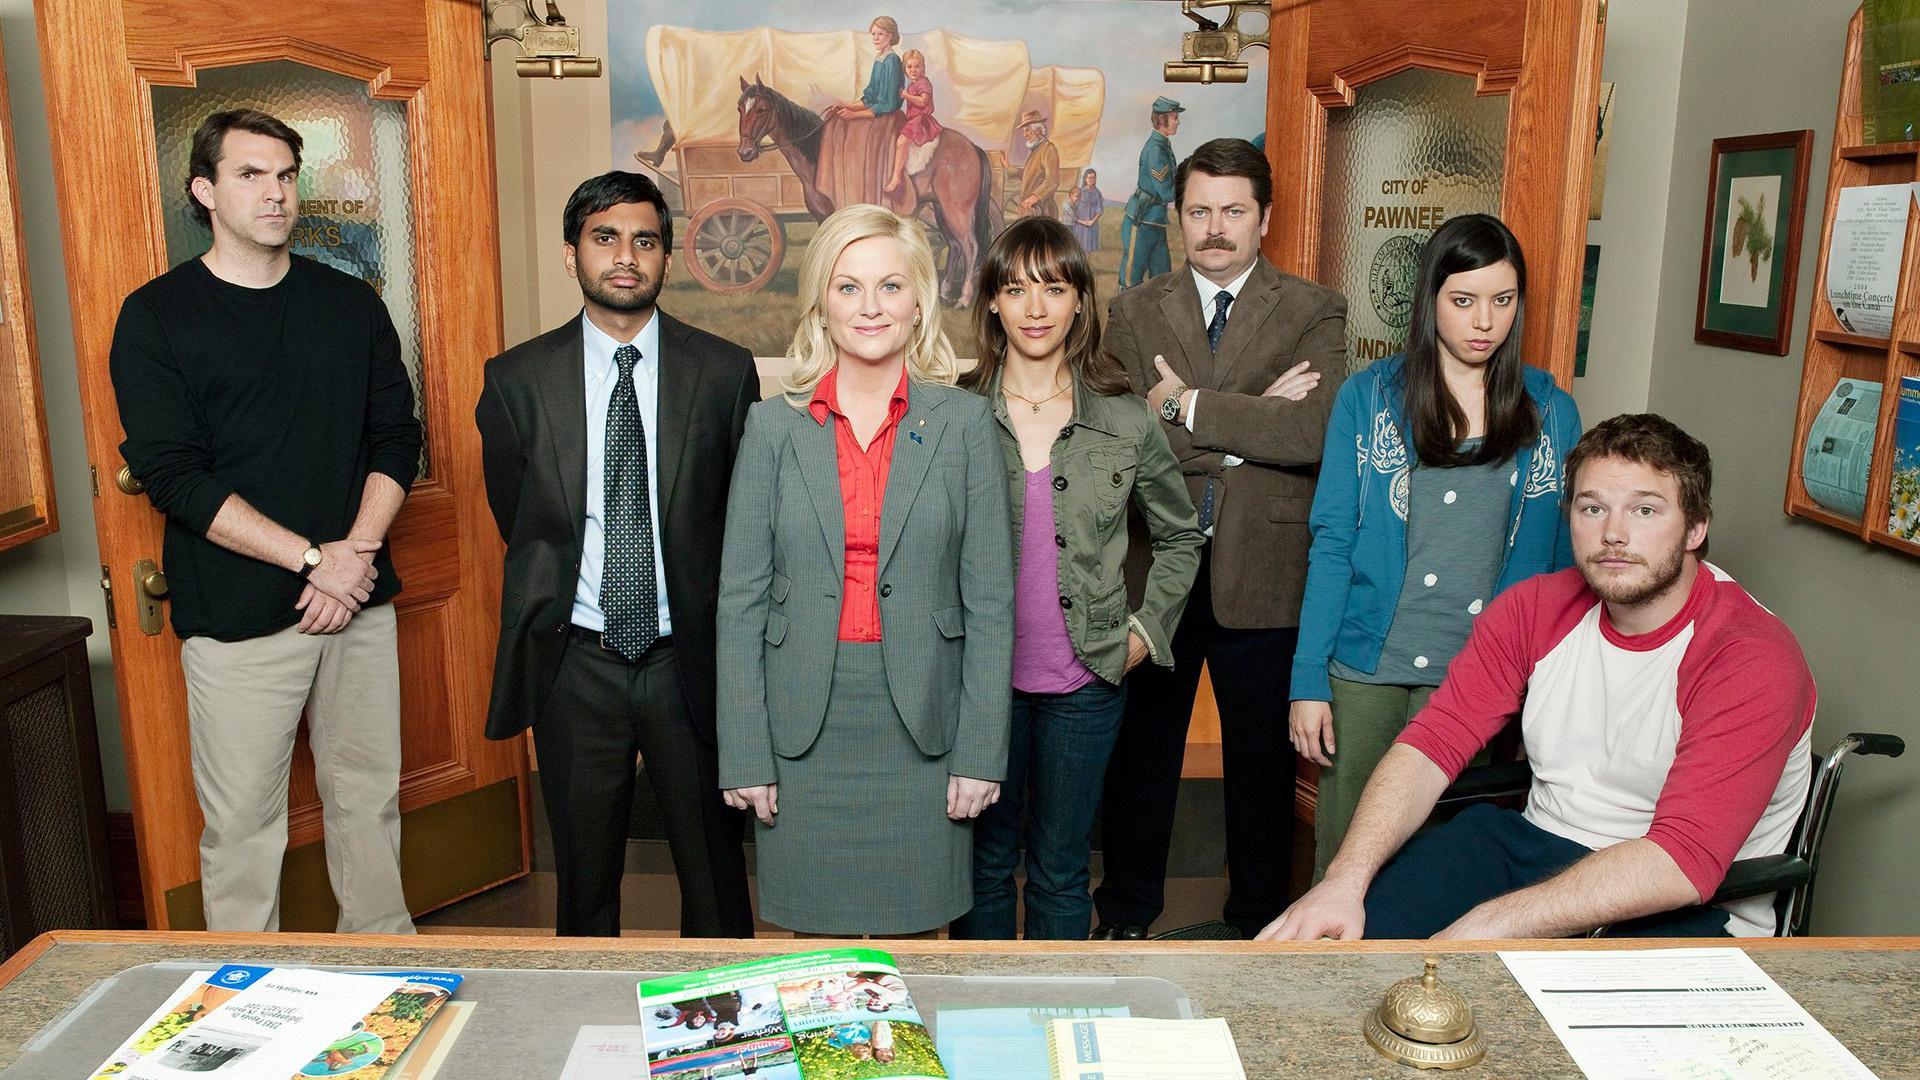 HD Parks and Recreation cast members Wallpaper. Download Free